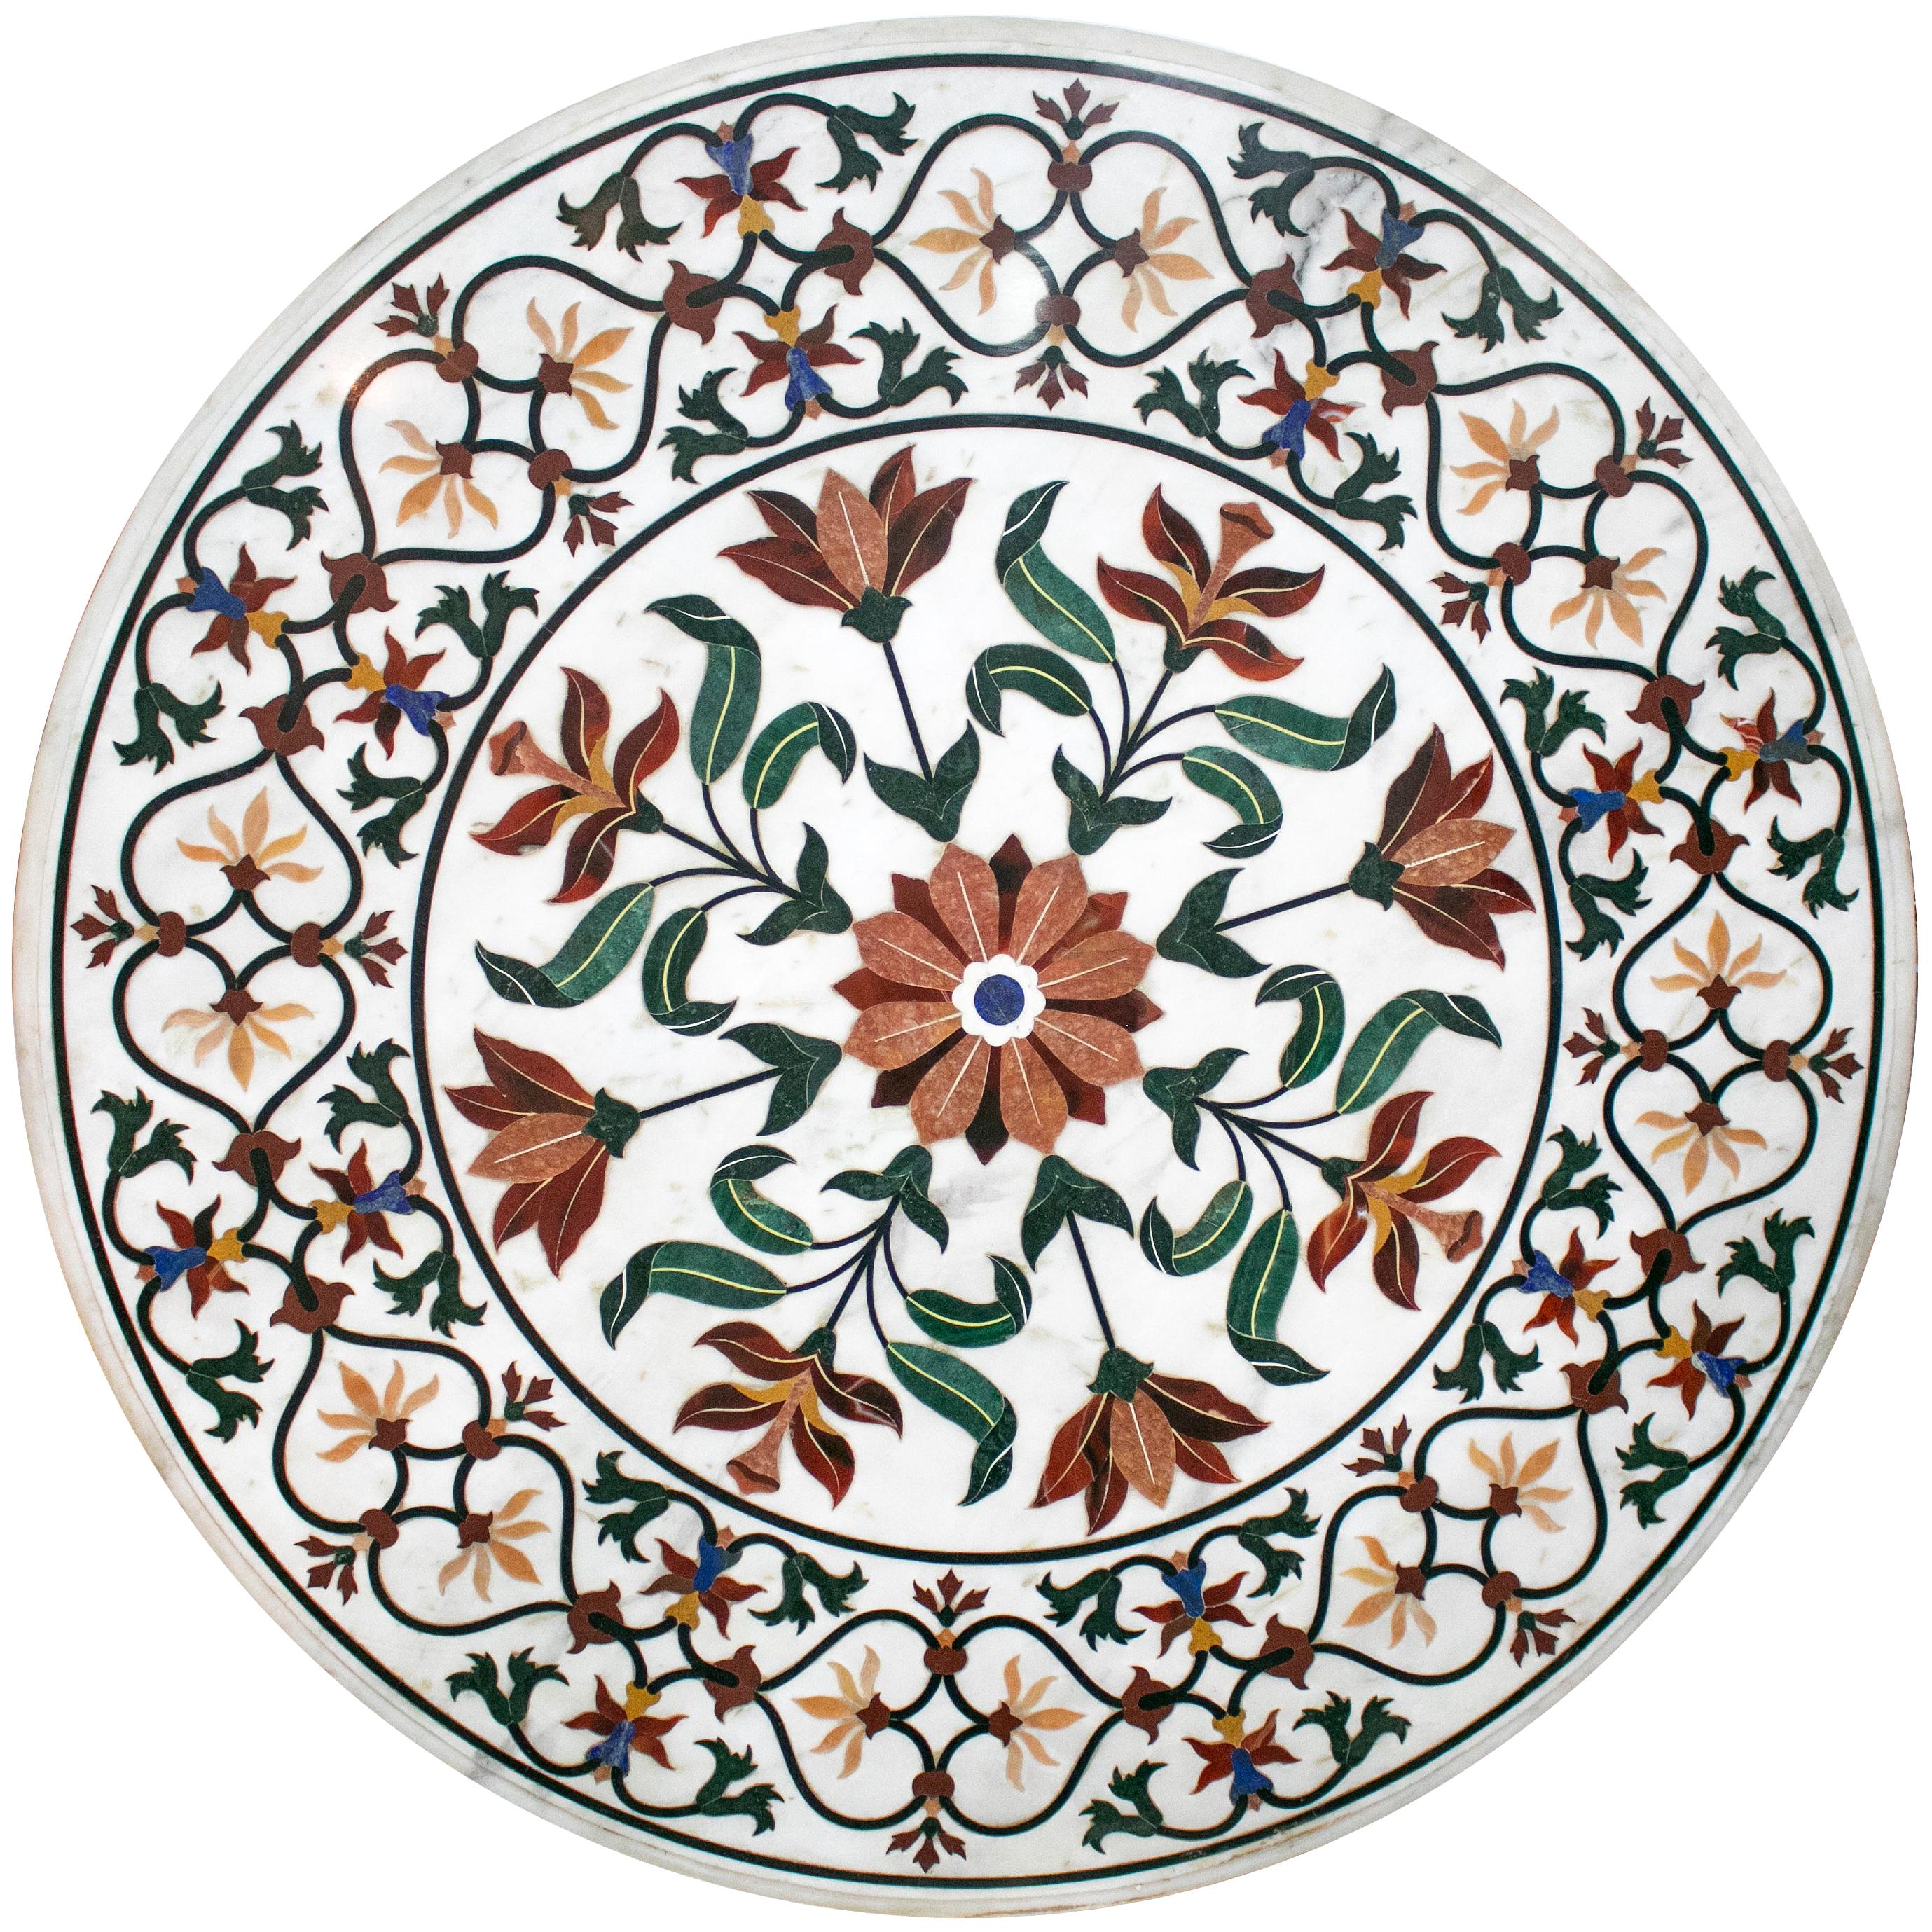 Details about   12" Marble Table Top Pietra dura Inlay Art Work For Home Decor Gifts 